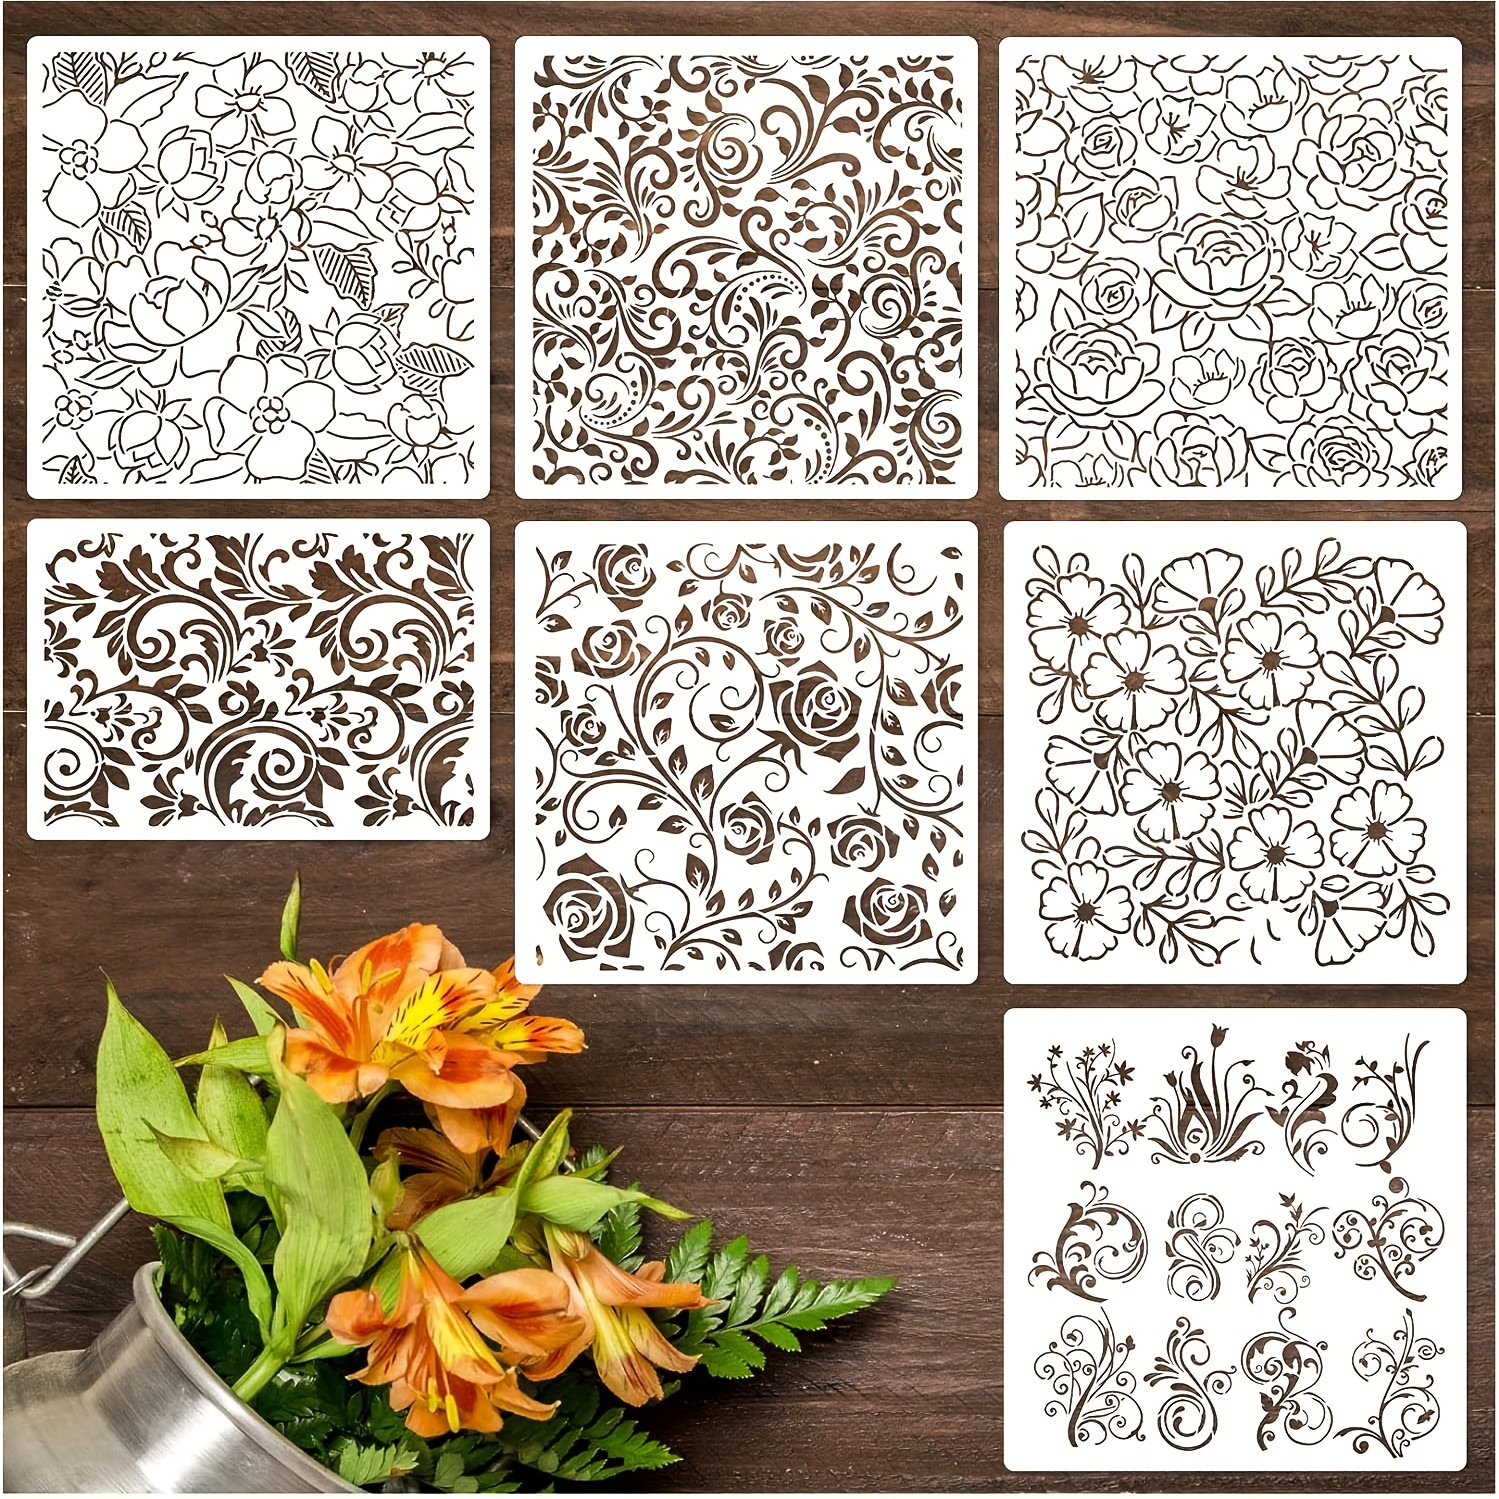  Botanical Flower Stencils for Crafts Small Wildflower Floral  Paint Stencil for Painting on Wood Card Making, Tiny Nature Vine Herb  Essential Art Stencils for Adults Kids Furniture Walls (50 flowers